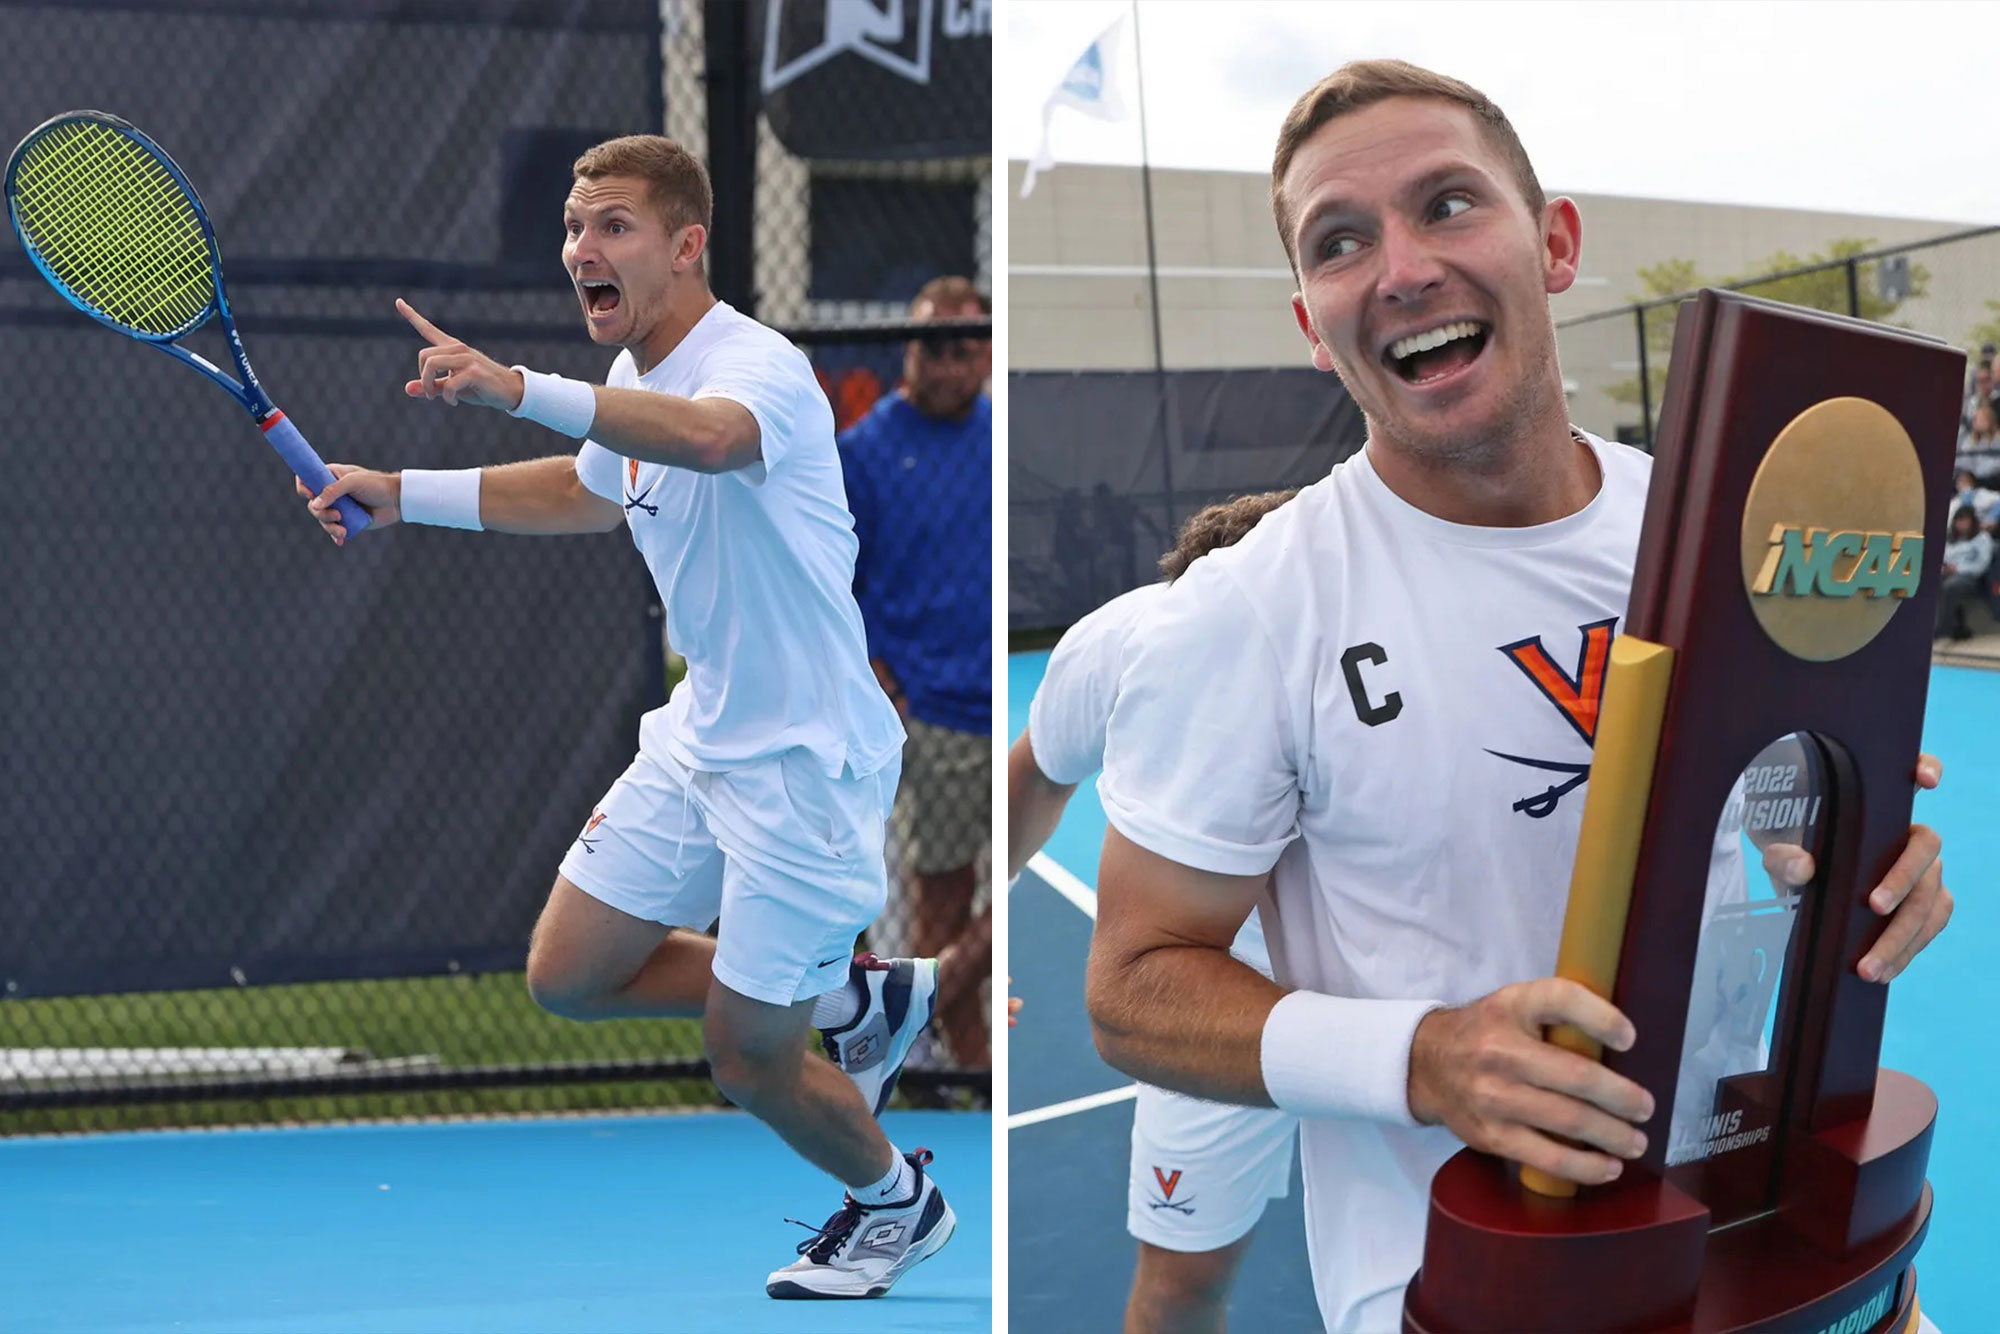 Gianni Ross celebrates on the court while holding a tennis racket and pointing, and Ross holds the NCAA trophy and smiles